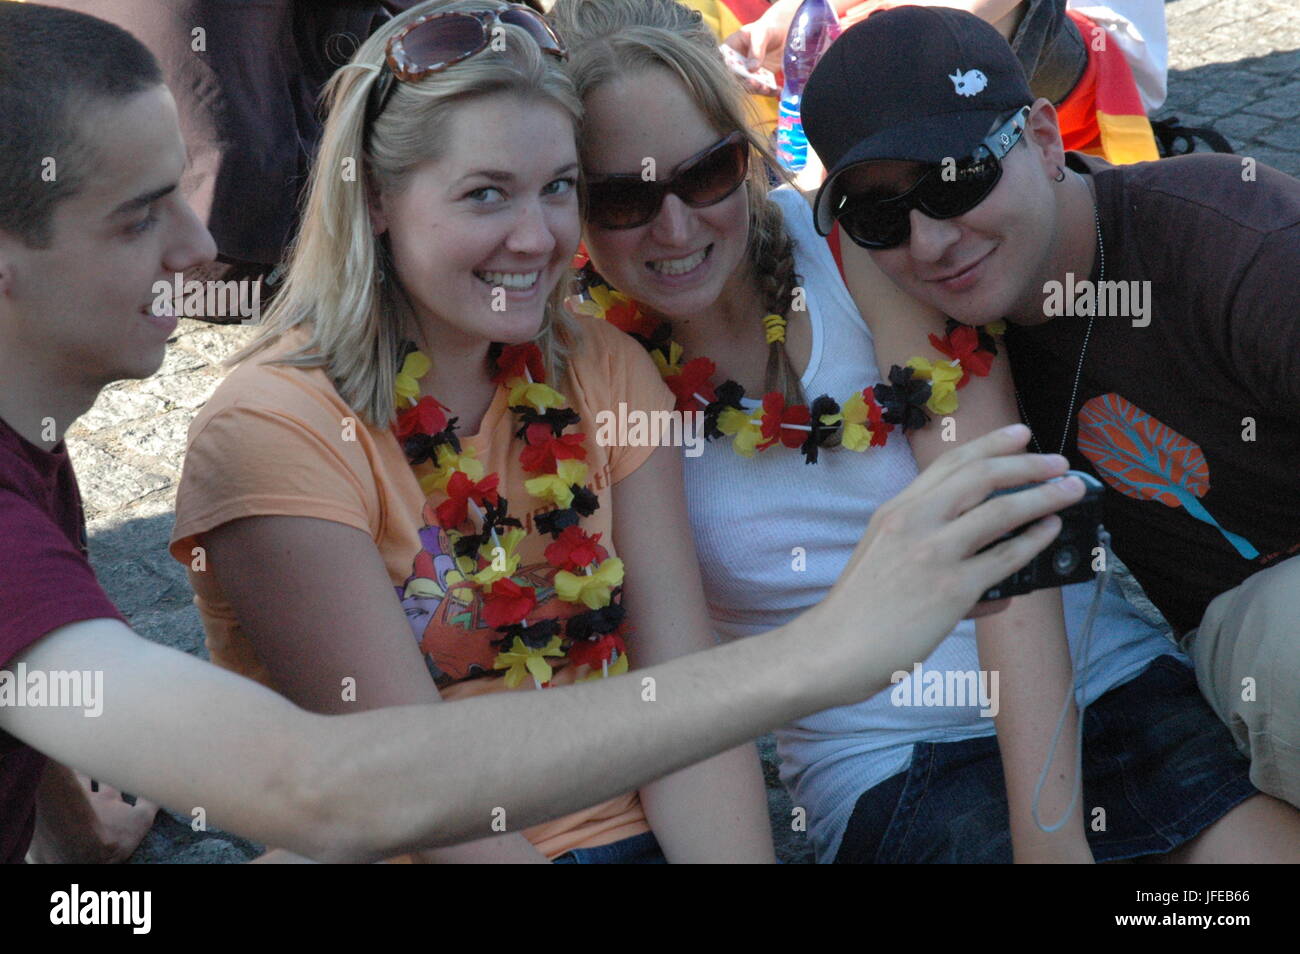 Impressions from the fan mile at the Football World Cup 2006 in Berlin on July 4, 2006, Germany Stock Photo